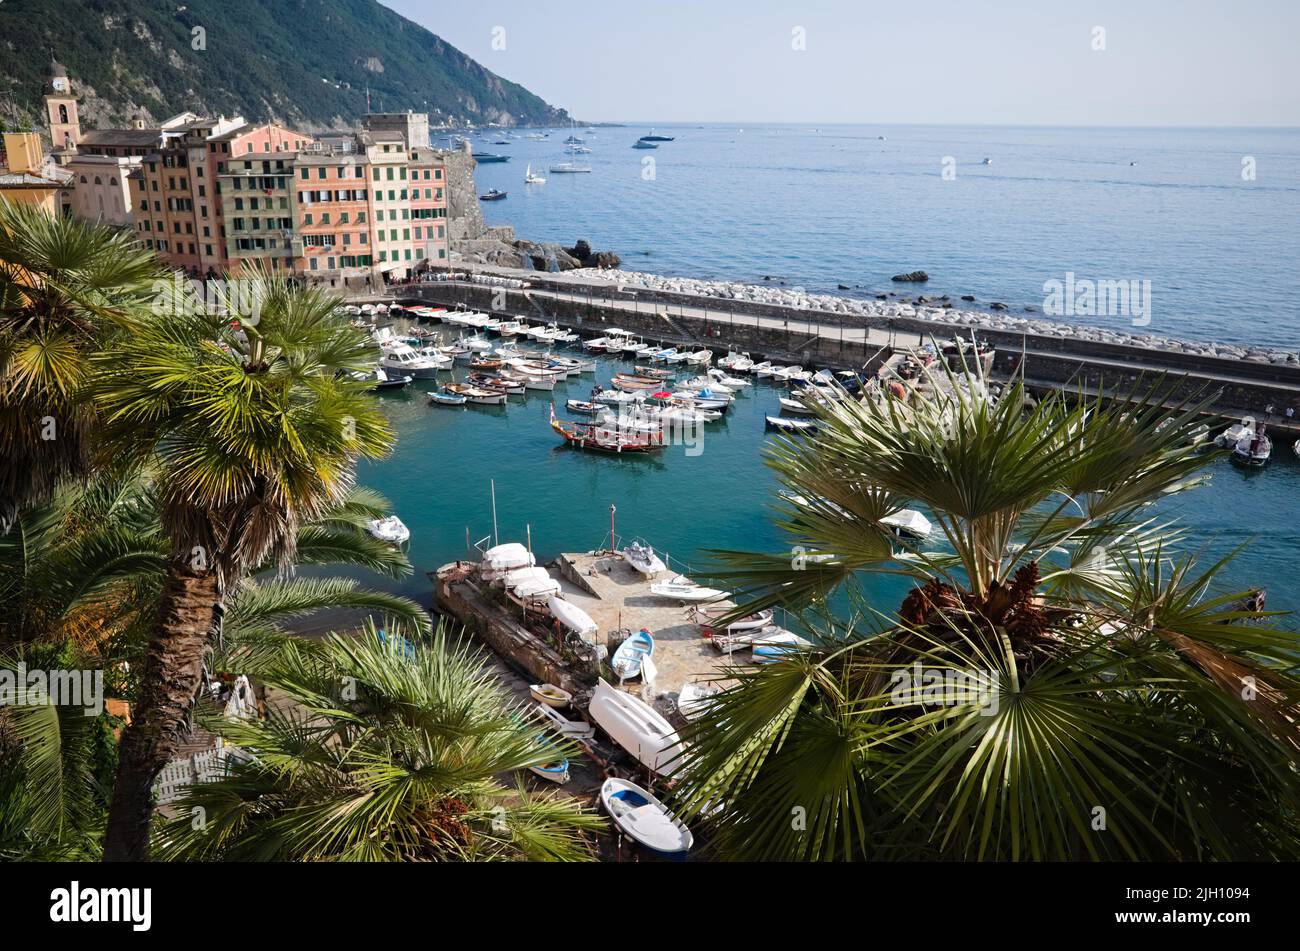 View of marina on mediterranean coast of Camogli, Liguria, Italy. Small port with moored boats and yachts in bay in village on Italian Riviera Stock Photo